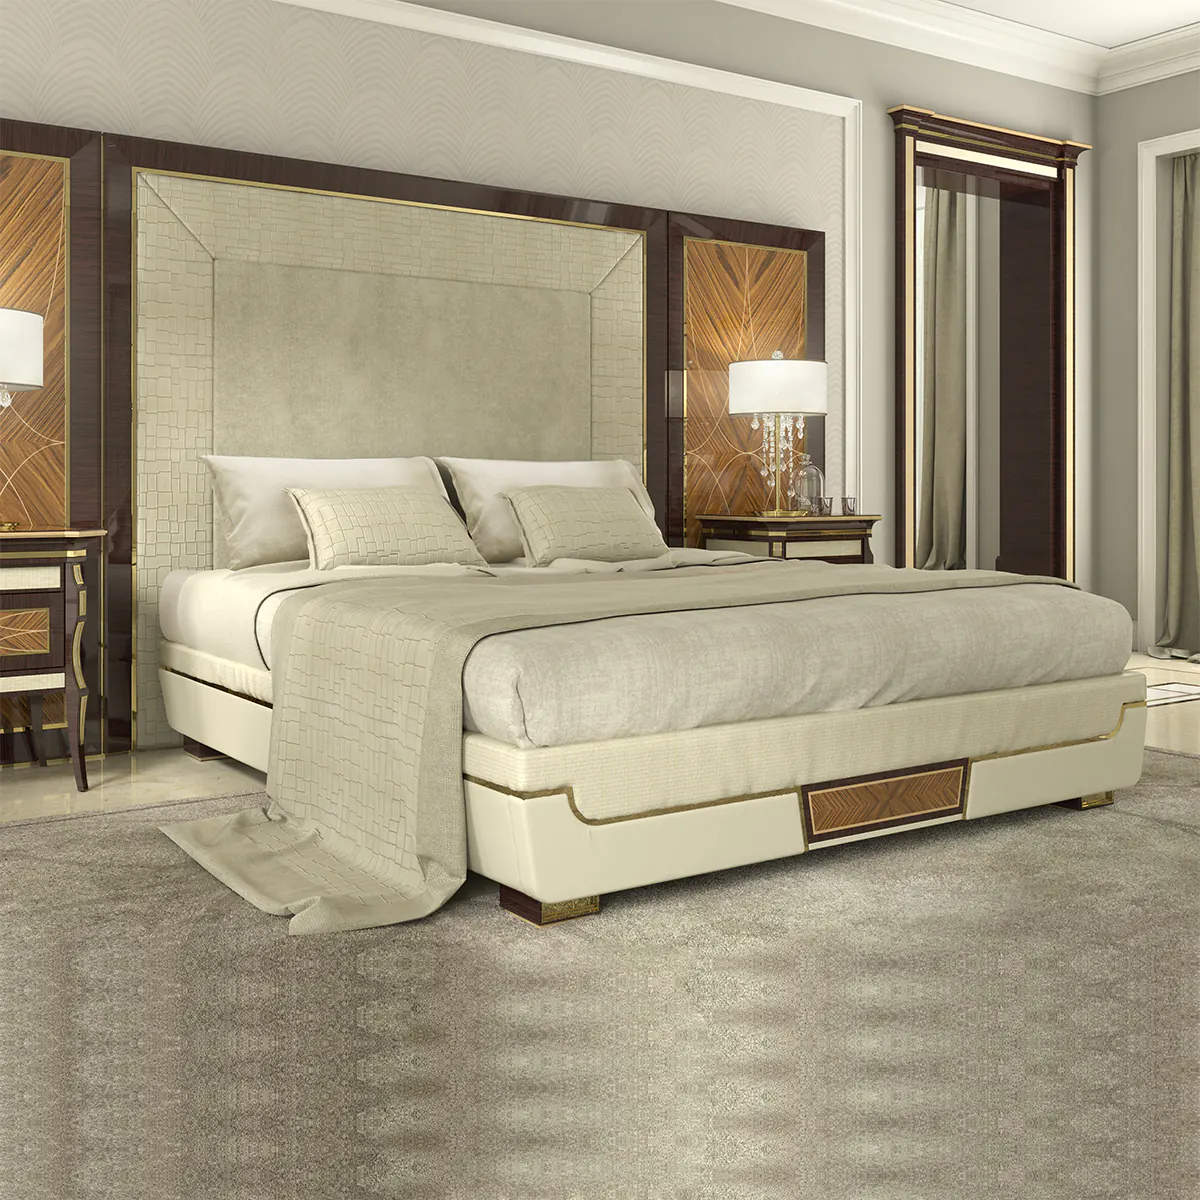 Monte Carlo LUX bed